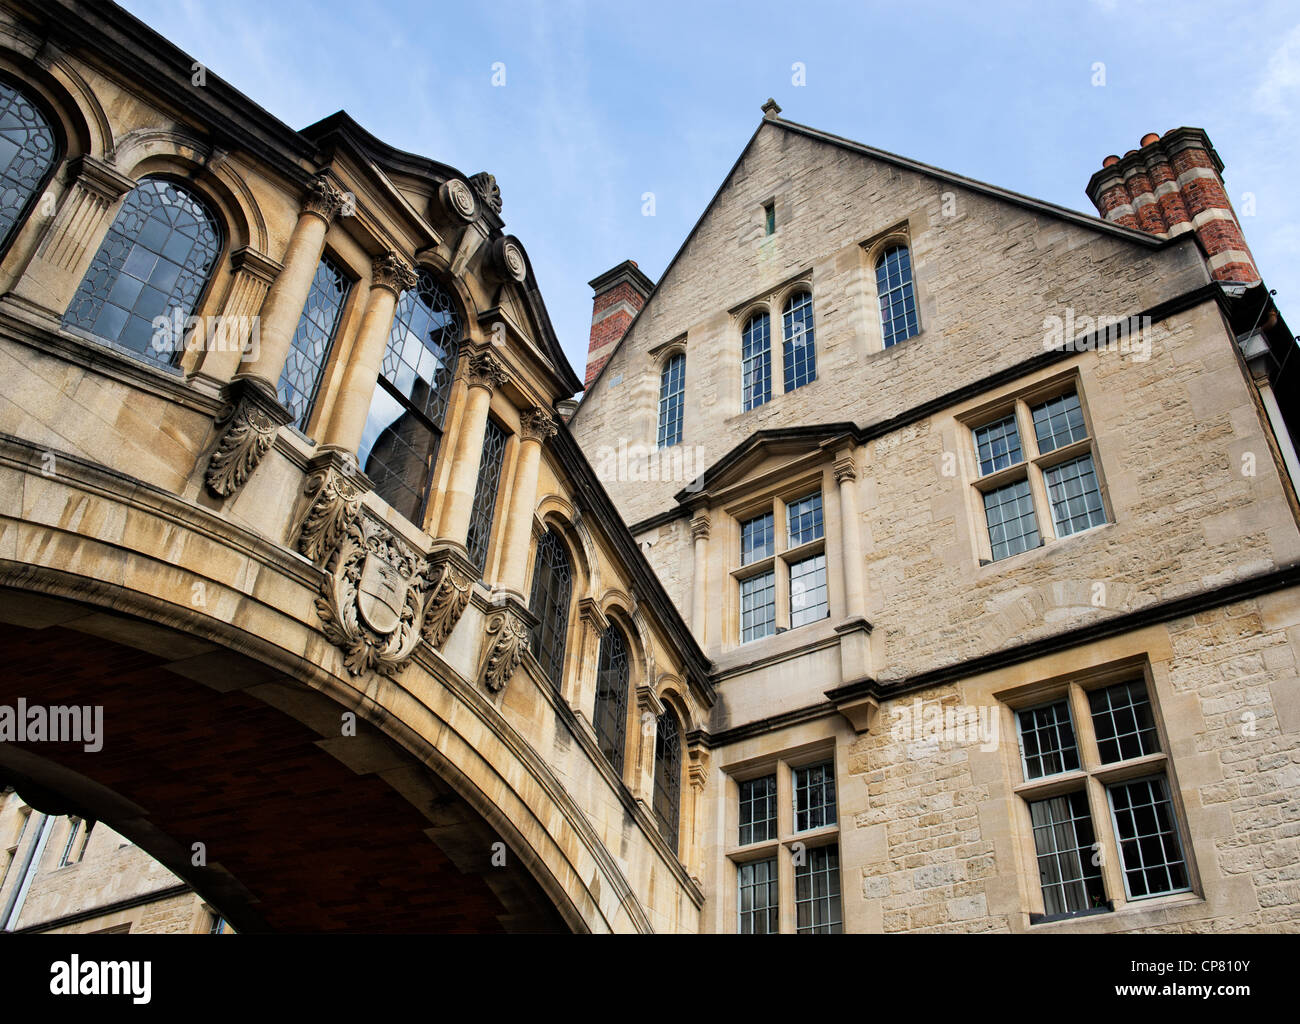 Hertford Bridge / The bridge of sighs. The bridge links together the Old and New Quadrangles of Hertford College. Oxford, Oxfordshire, England Stock Photo